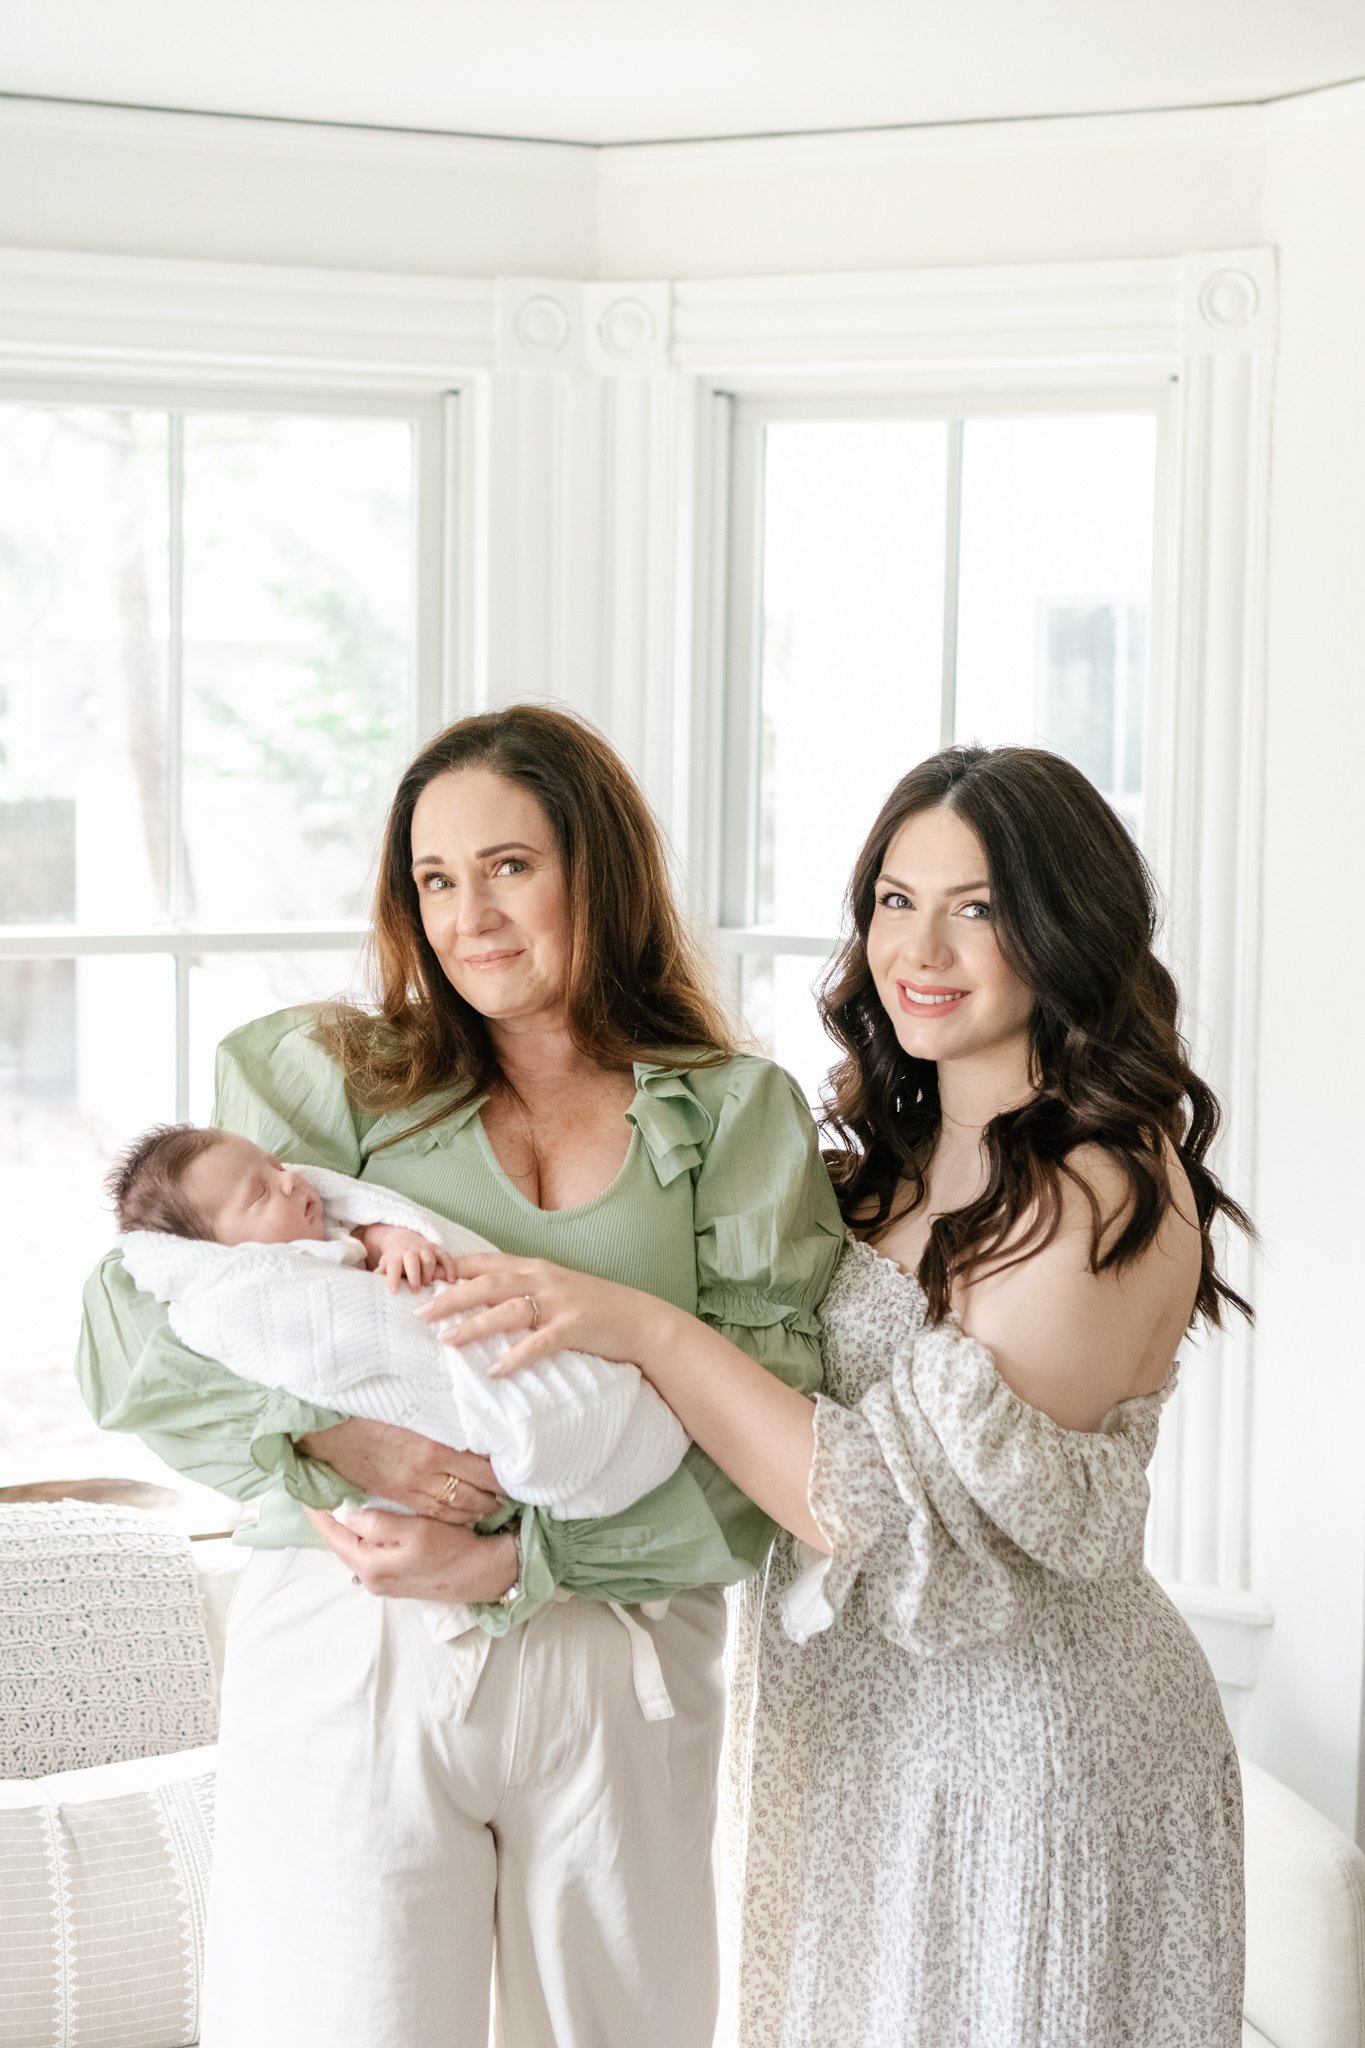  Nicole Hawkins PHotogrpahy captures a three-generation portrait with a grandmother, mother, and newborn baby girl. three generations of women newborn baby girl #NicoleHawkinsPhotography #NicoleHawkinsNewborns #MontclairNewbornPhotographer #InHomeNew